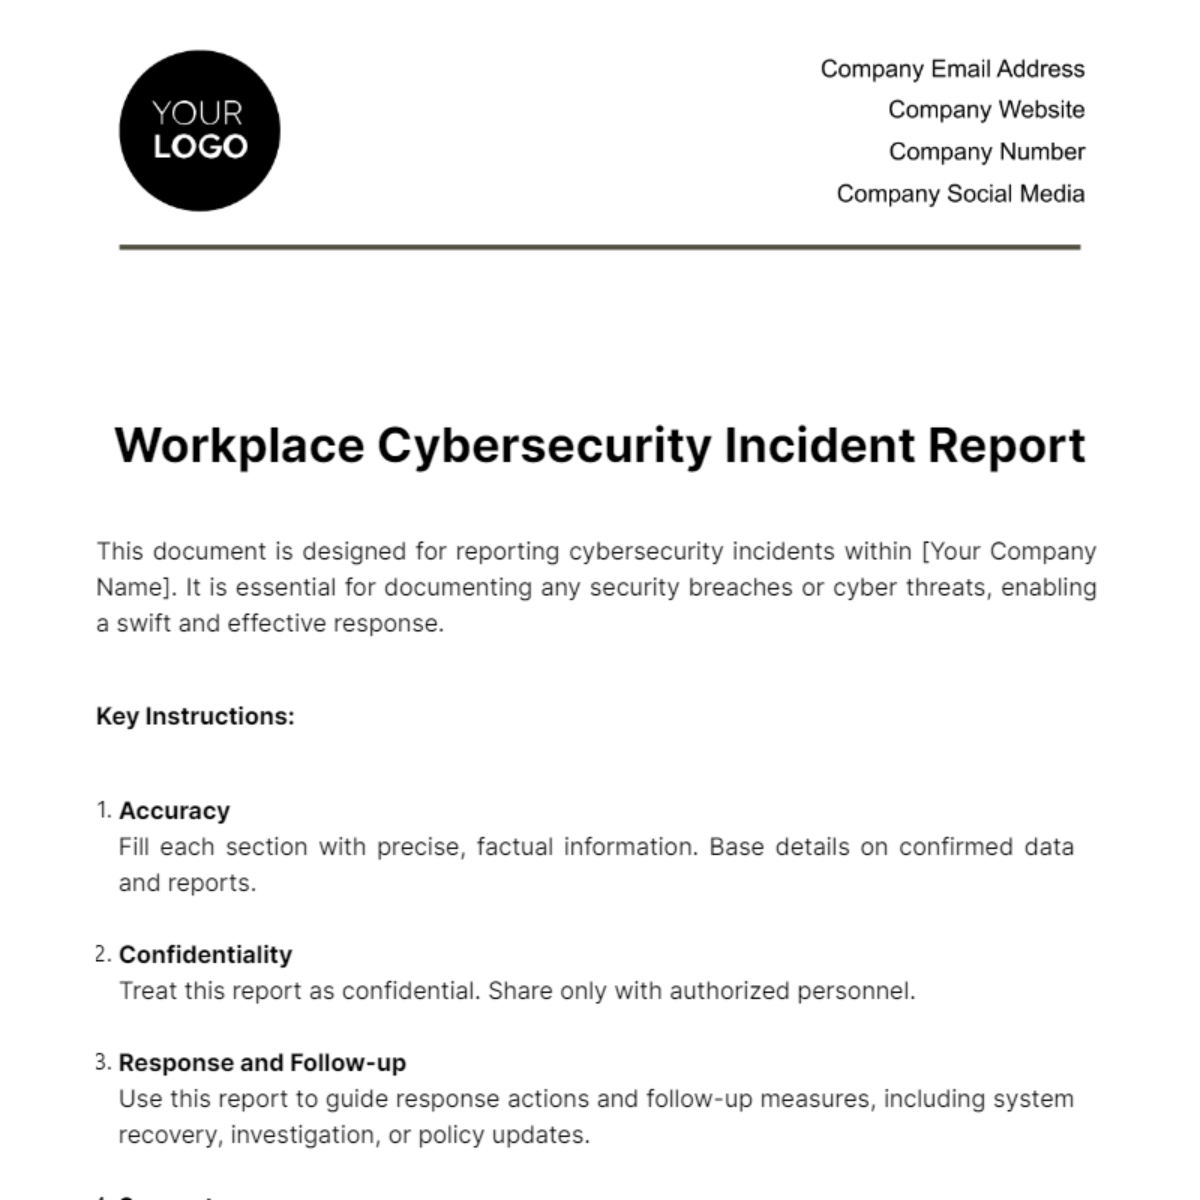 Free Workplace Cybersecurity Incident Report Template